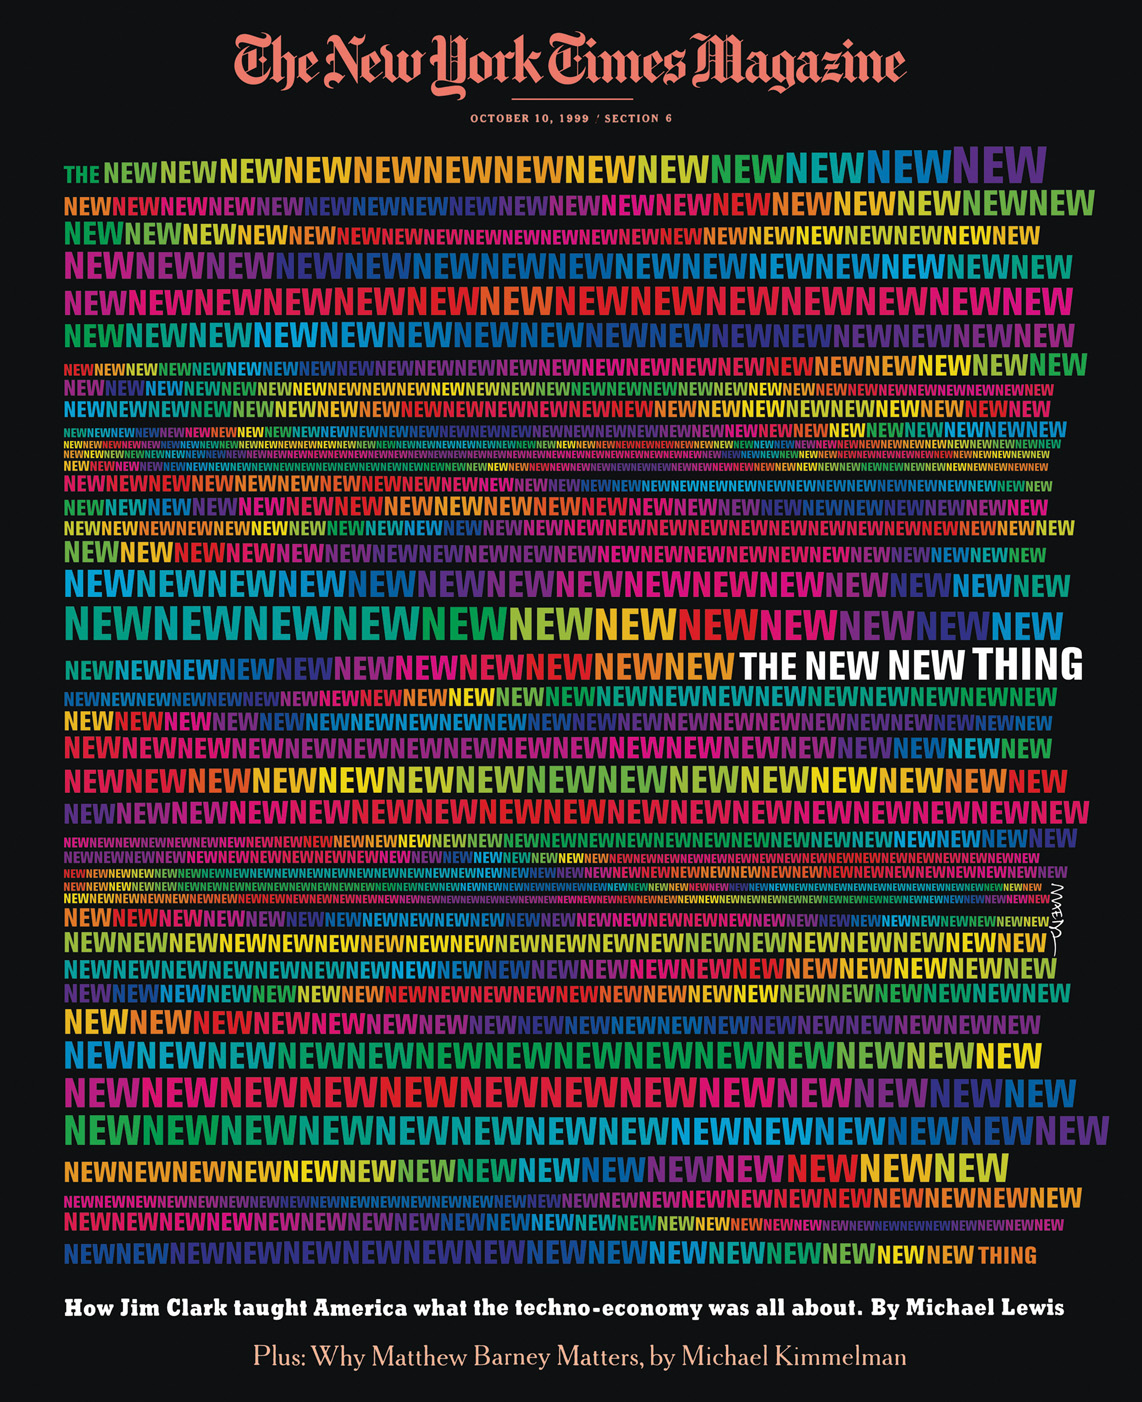 John Maeda, The New York Times magazine (cover) 1999. Art director: Janet Froelich